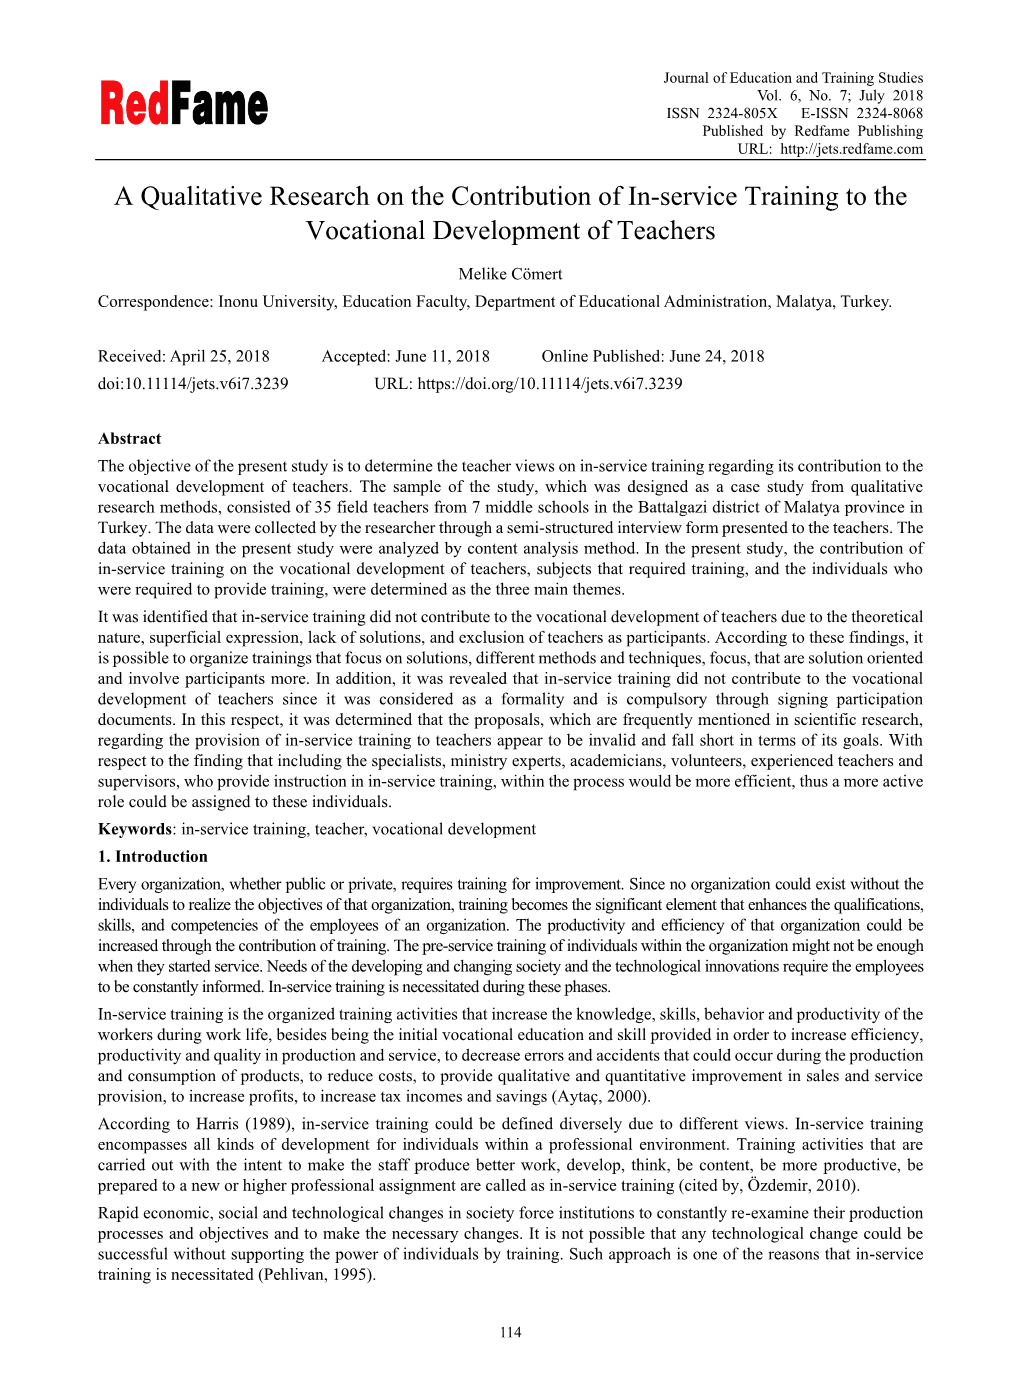 A Qualitative Research on the Contribution of In-Service Training to the Vocational Development of Teachers